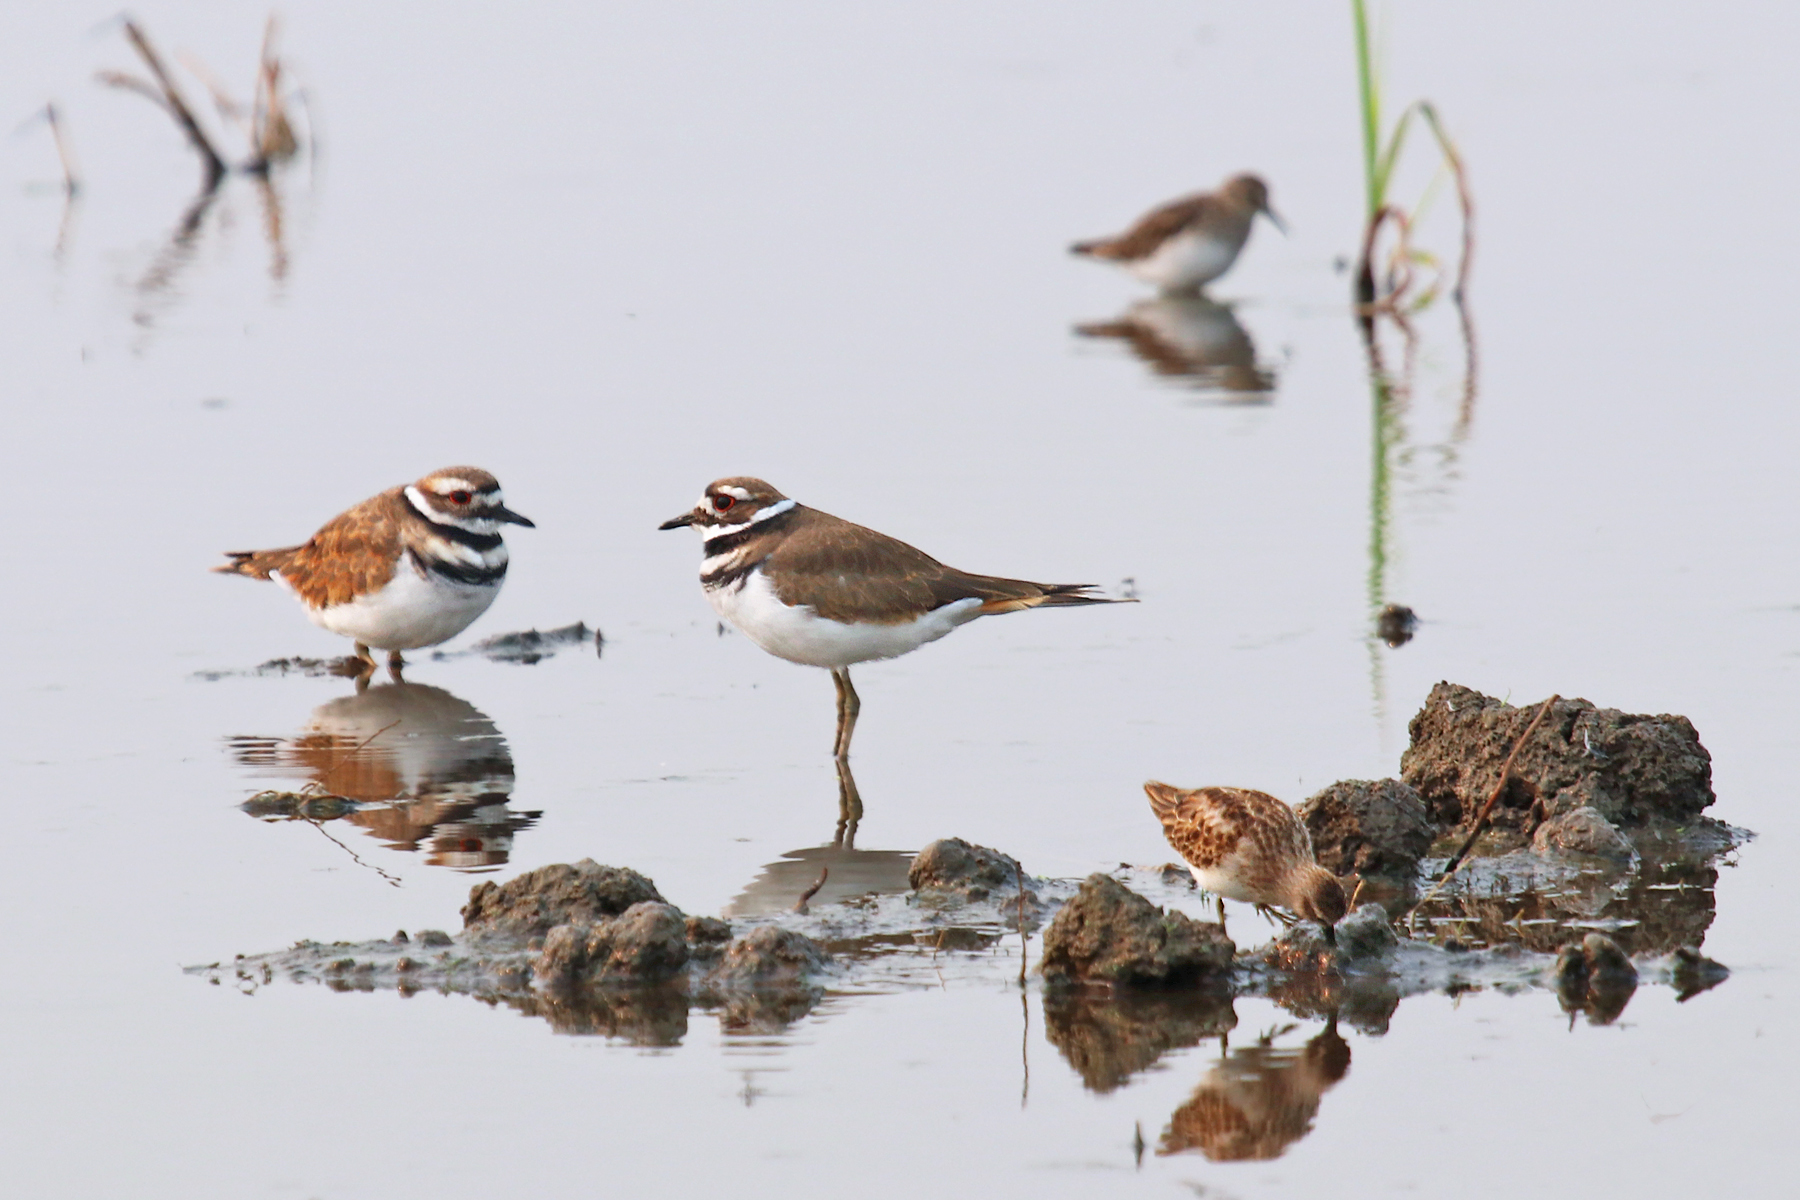 Killdeer, one of many shorebird species that migrate through the Sacramento Valley, stop for a drink in a flooded rice field.